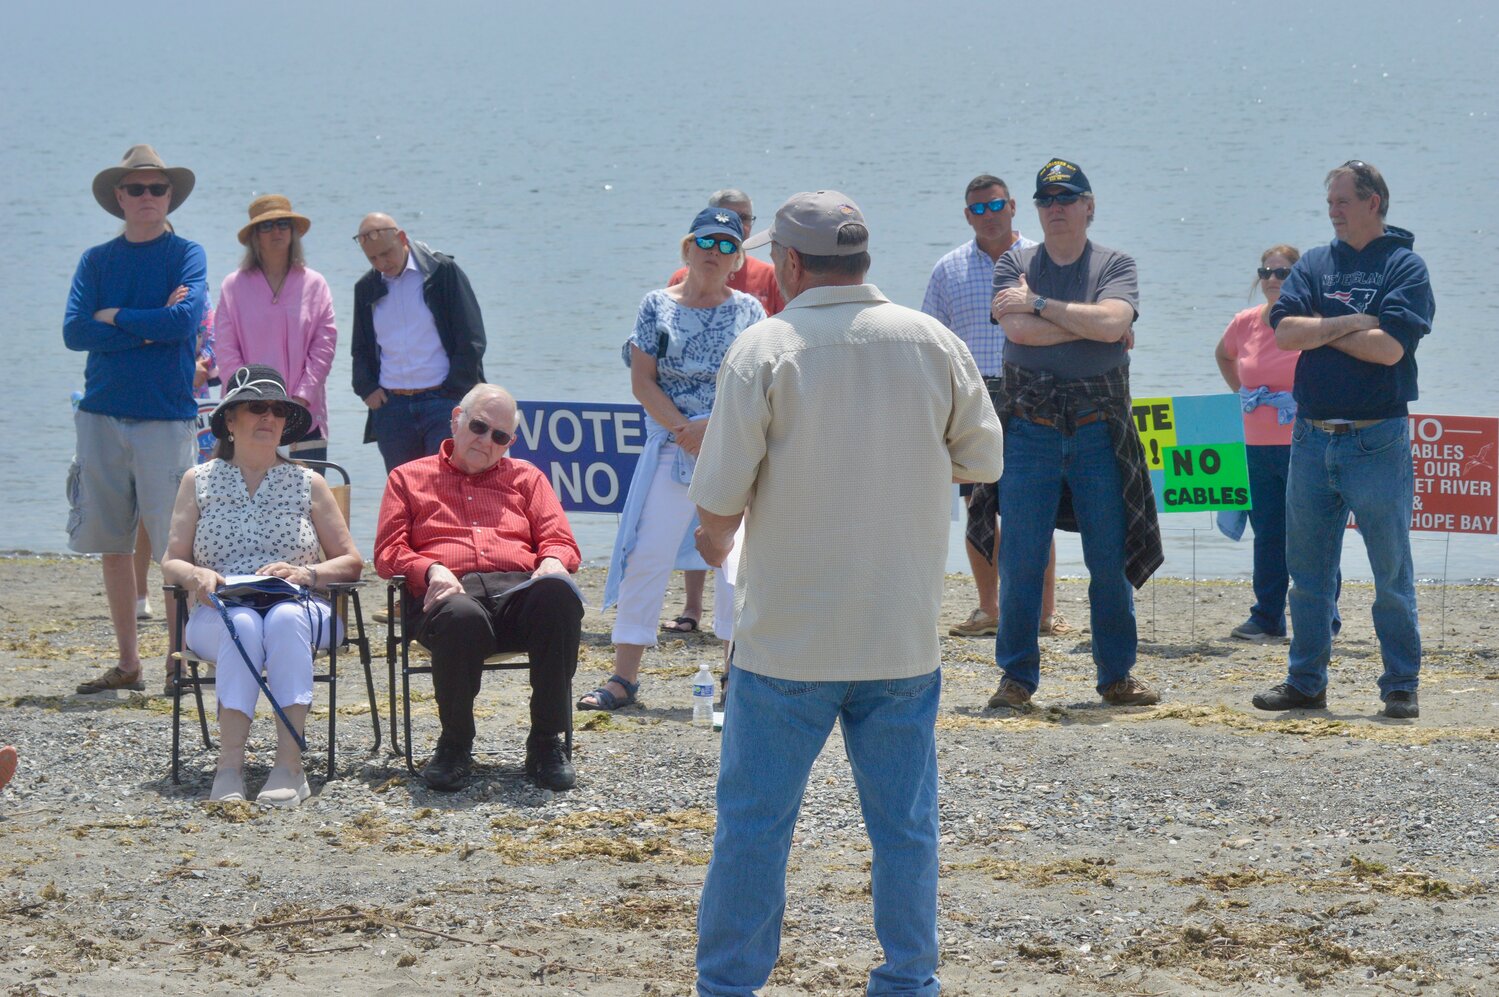 “Joe Biden doesn’t own the ocean,” Christopher Brown, a commercial fisherman from Point Judith told the crowd. “Our oceans will never be the same once they’ve created these monstrosities.”